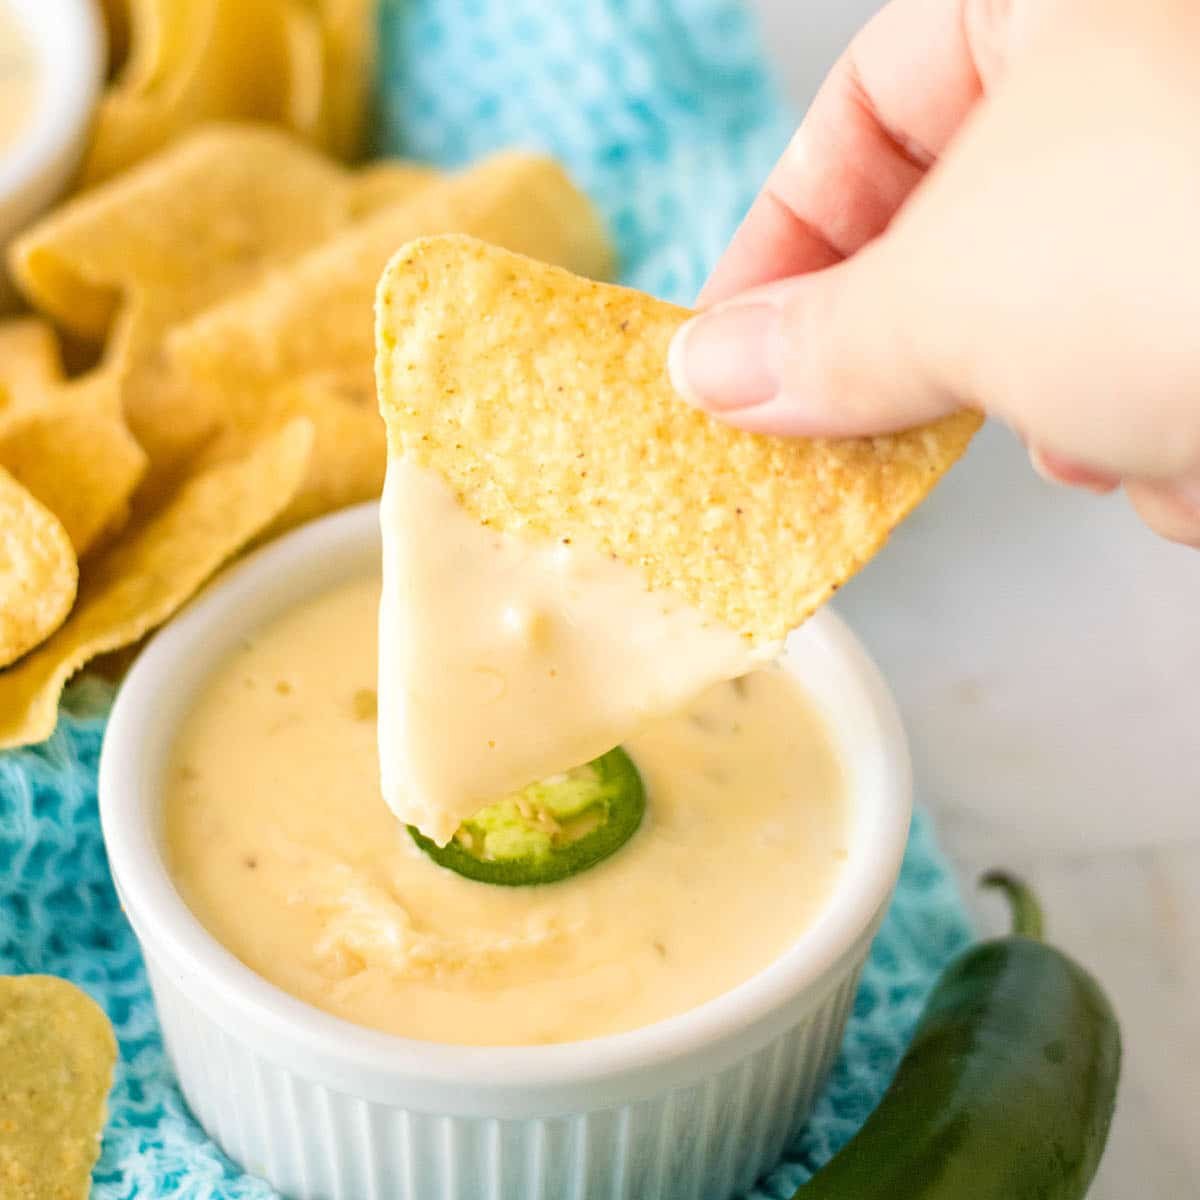 https://www.persnicketyplates.com/wp-content/uploads/2022/12/slow-cooker-white-queso-no-velveeta35-SQUARE.jpg